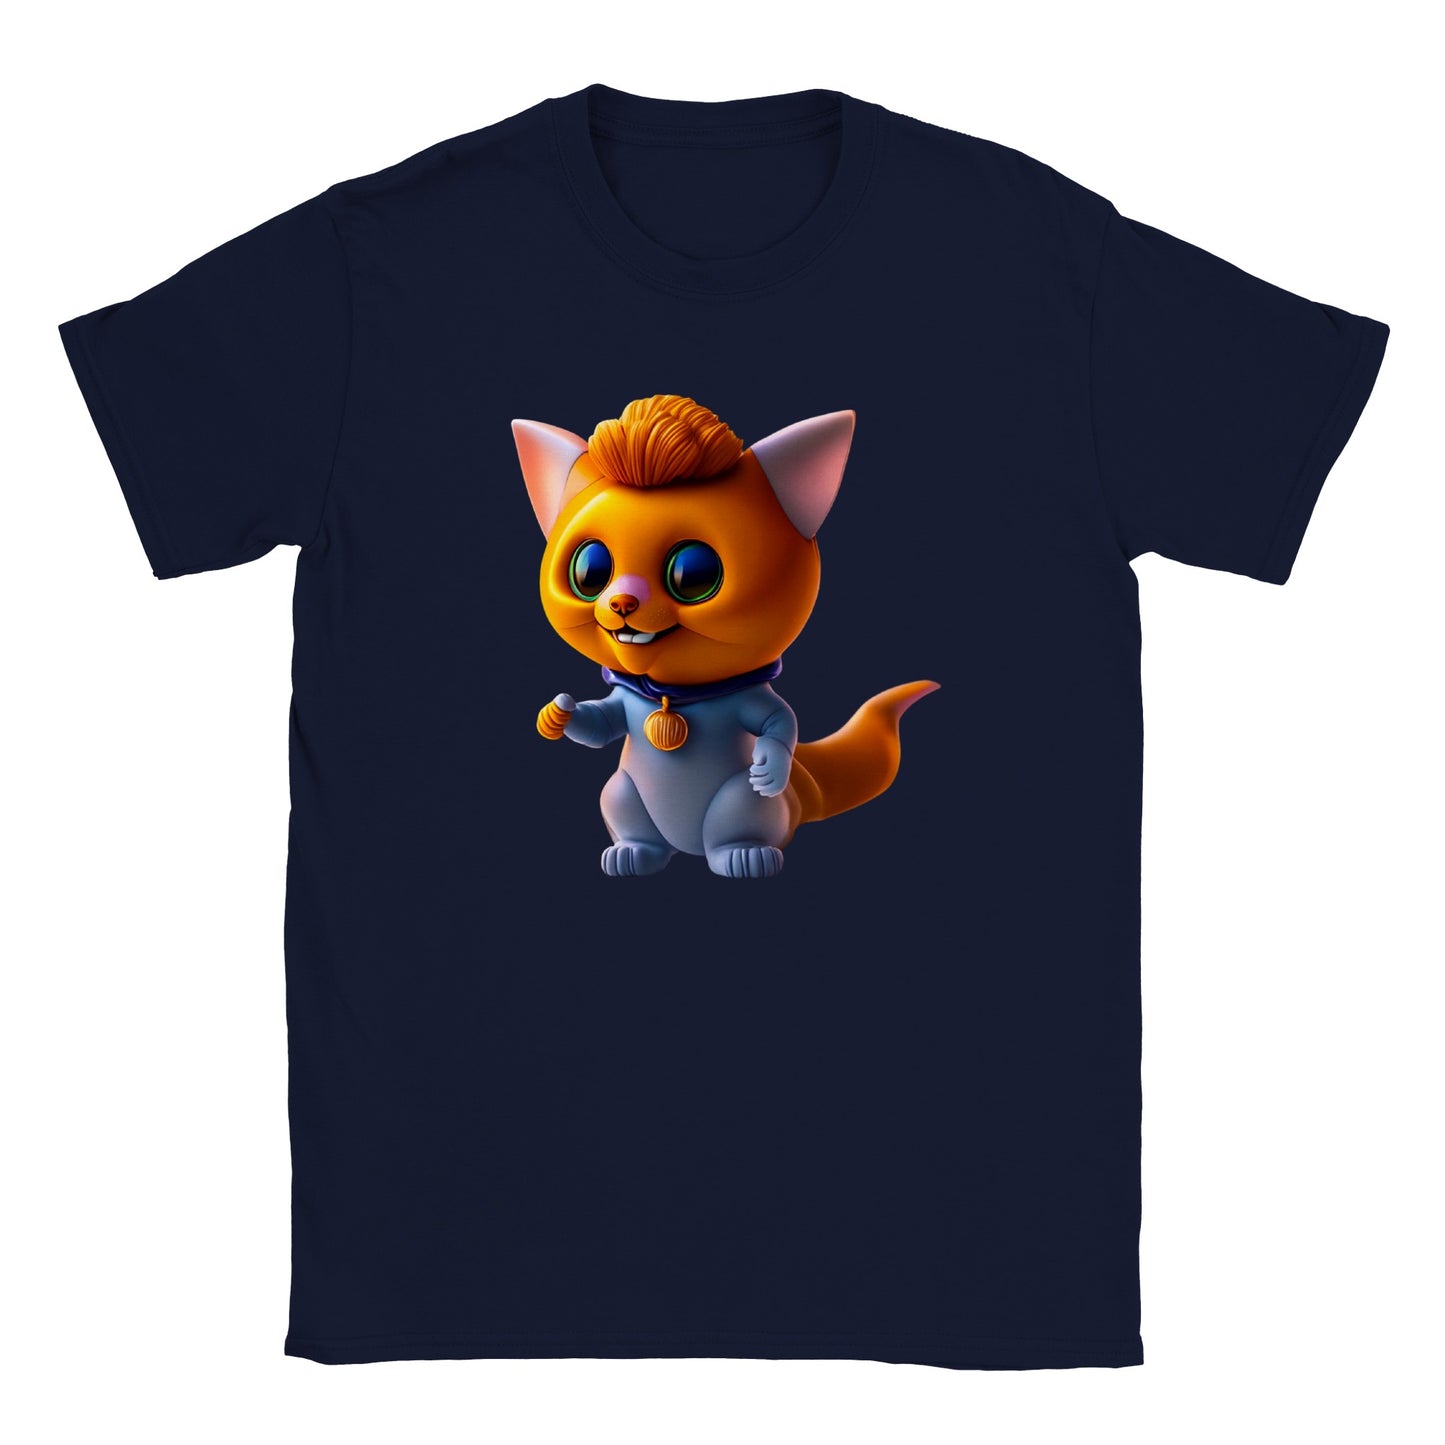 Adorable, Cool, Cute Cats and Kittens Toy - Classic Kids Crewneck T-Shirt 61